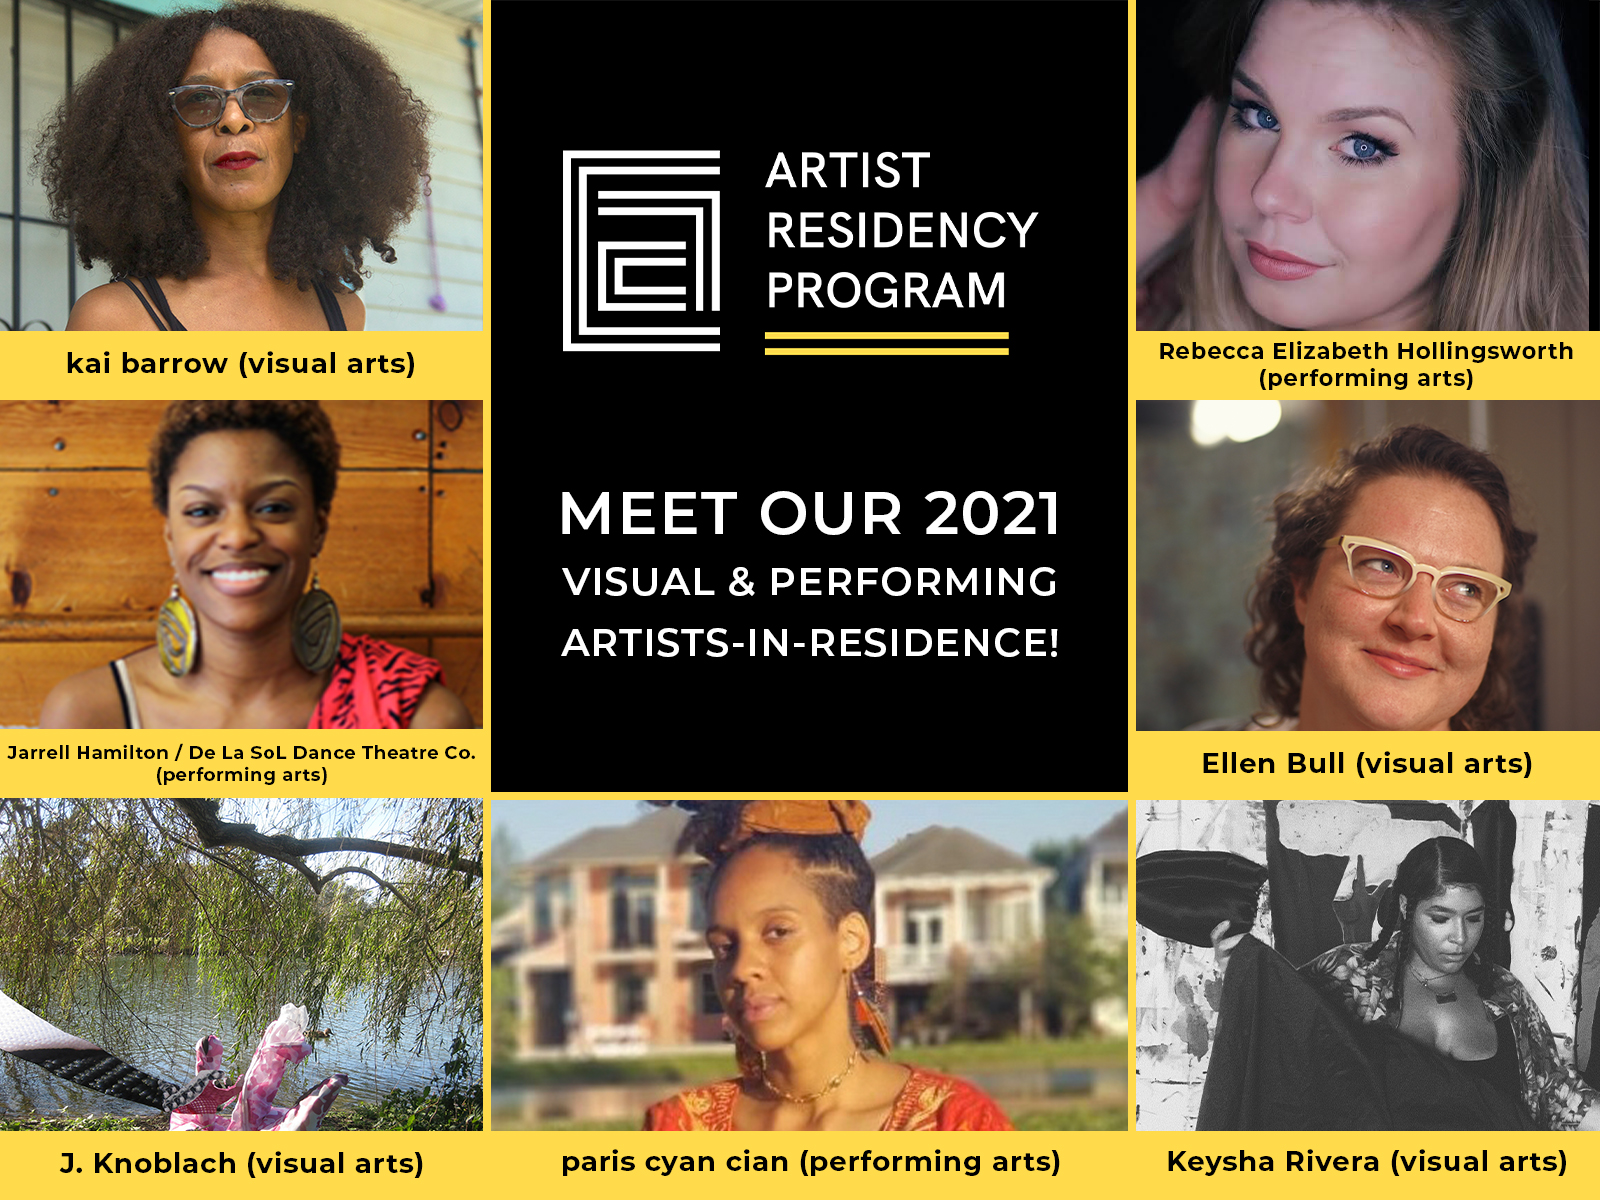 CAC Announces 2021 Visual & Performing Artists-in-Residence